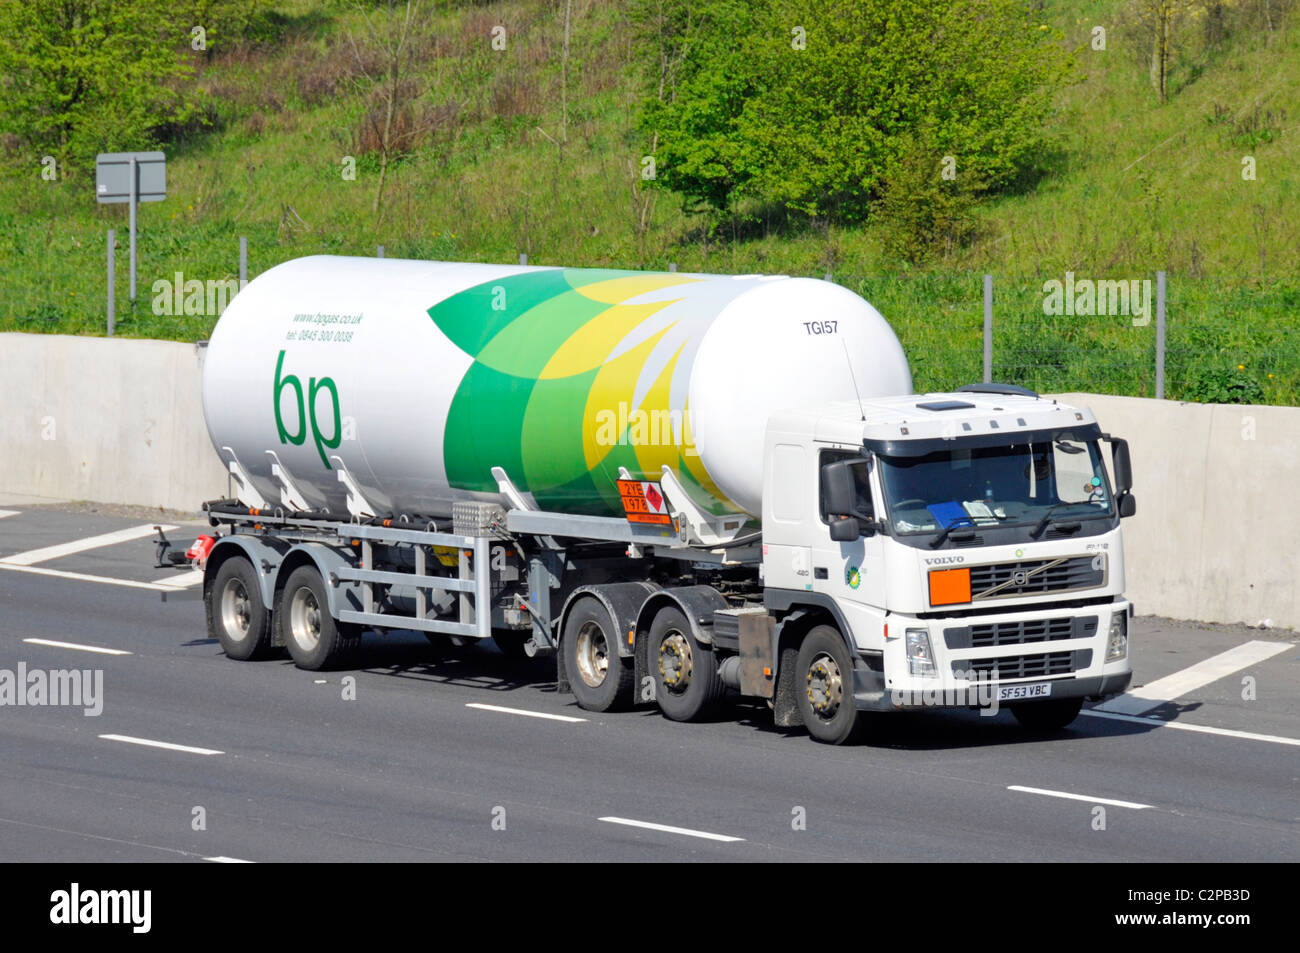 BP gas tanker trailer and white hgv lorry truck with Hazchem Hazardous Chemicals Dangerous Goods & material warning sign England UK Stock Photo